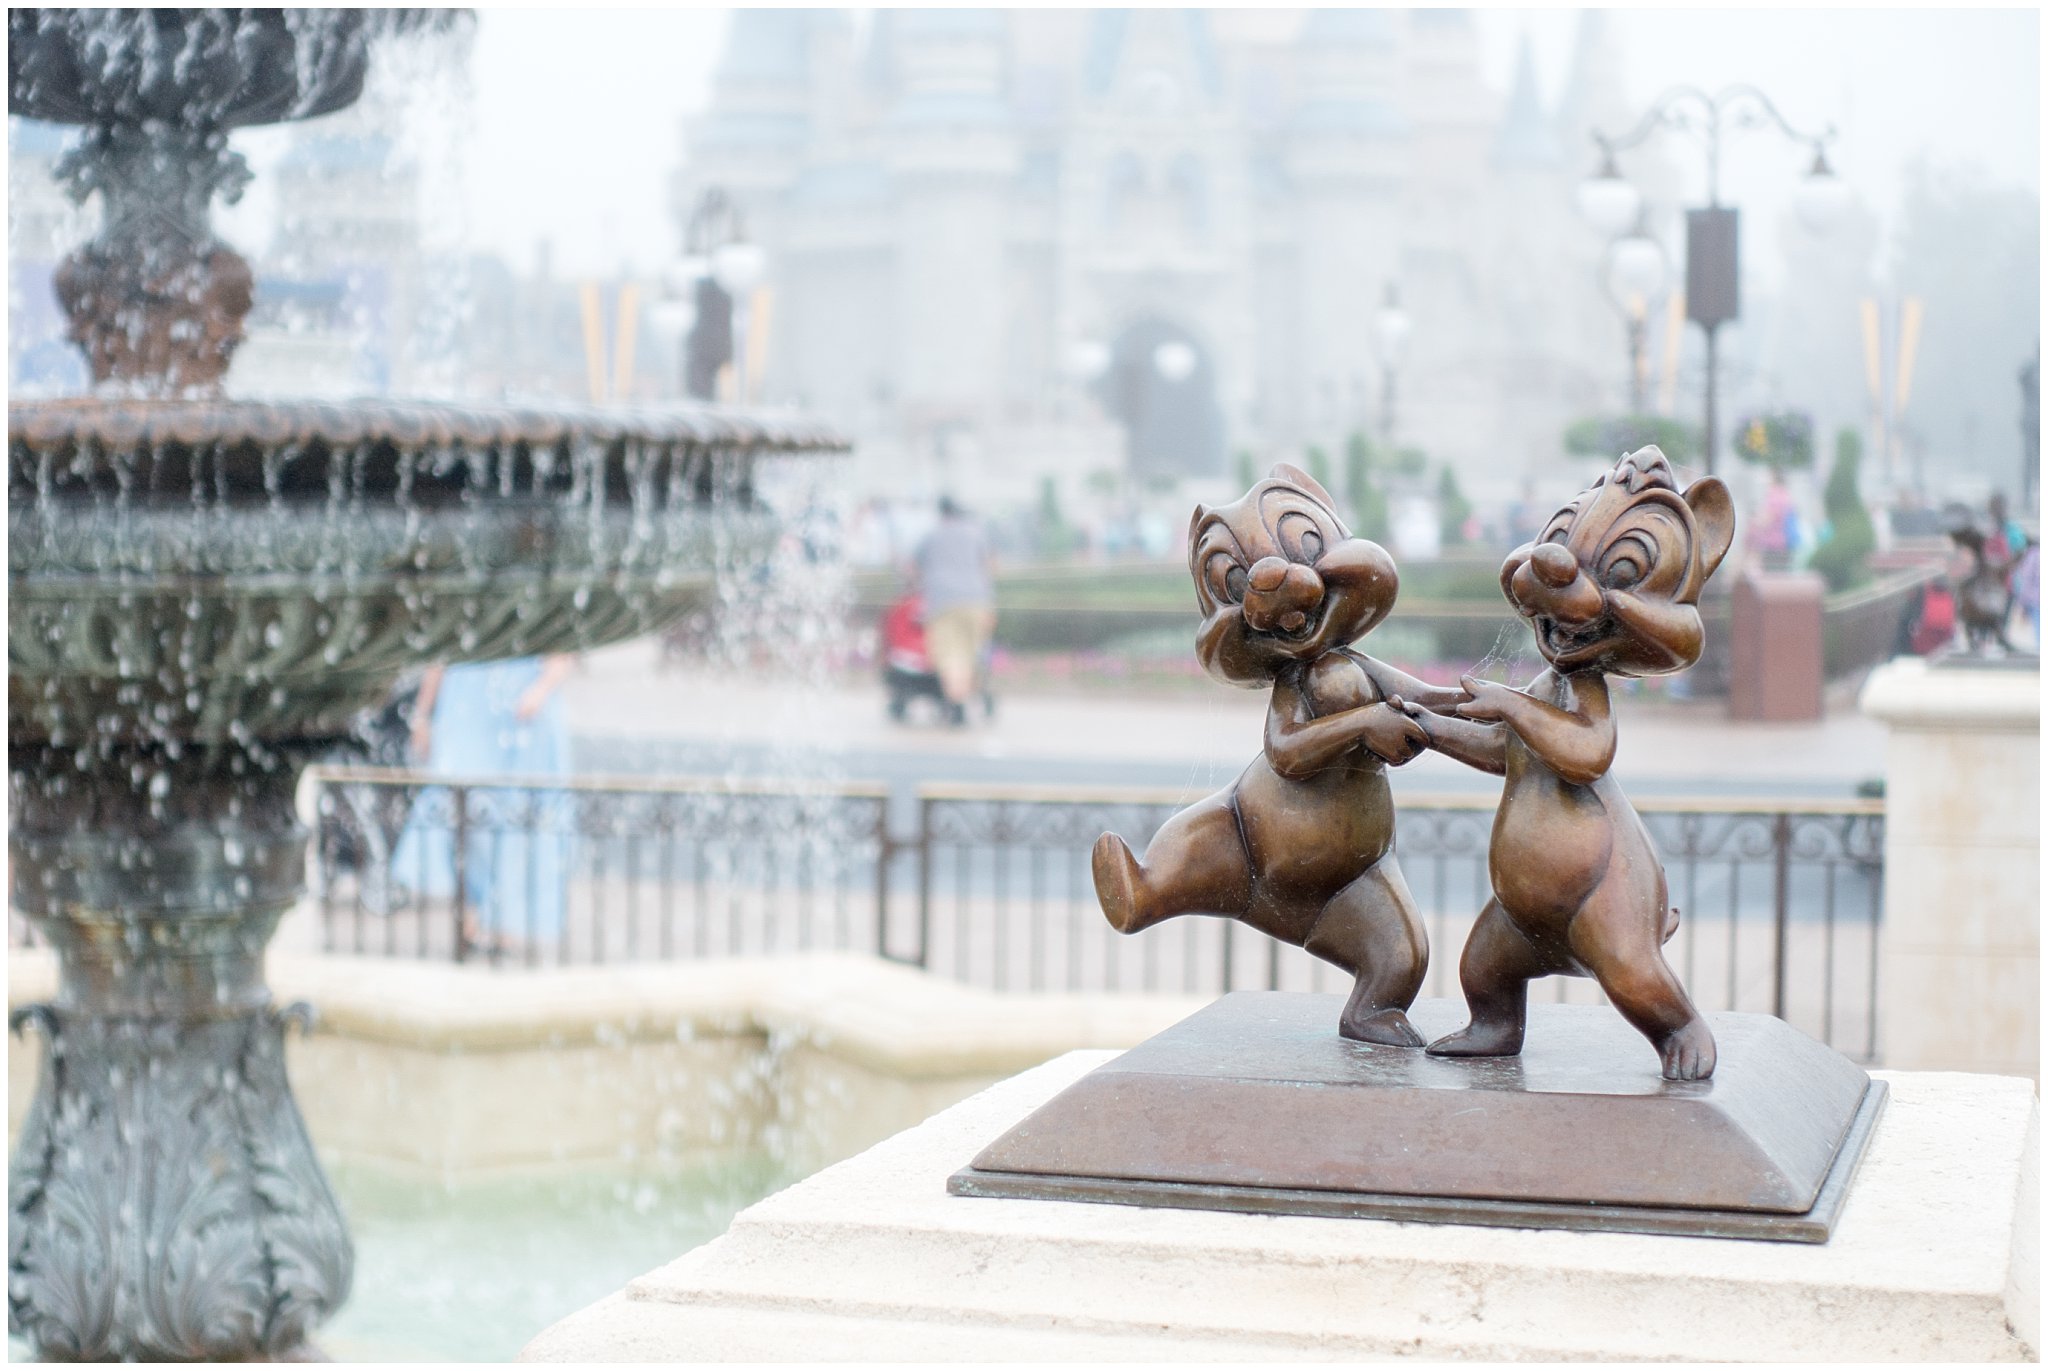 Chip and Dale in front of Cinderella's castle